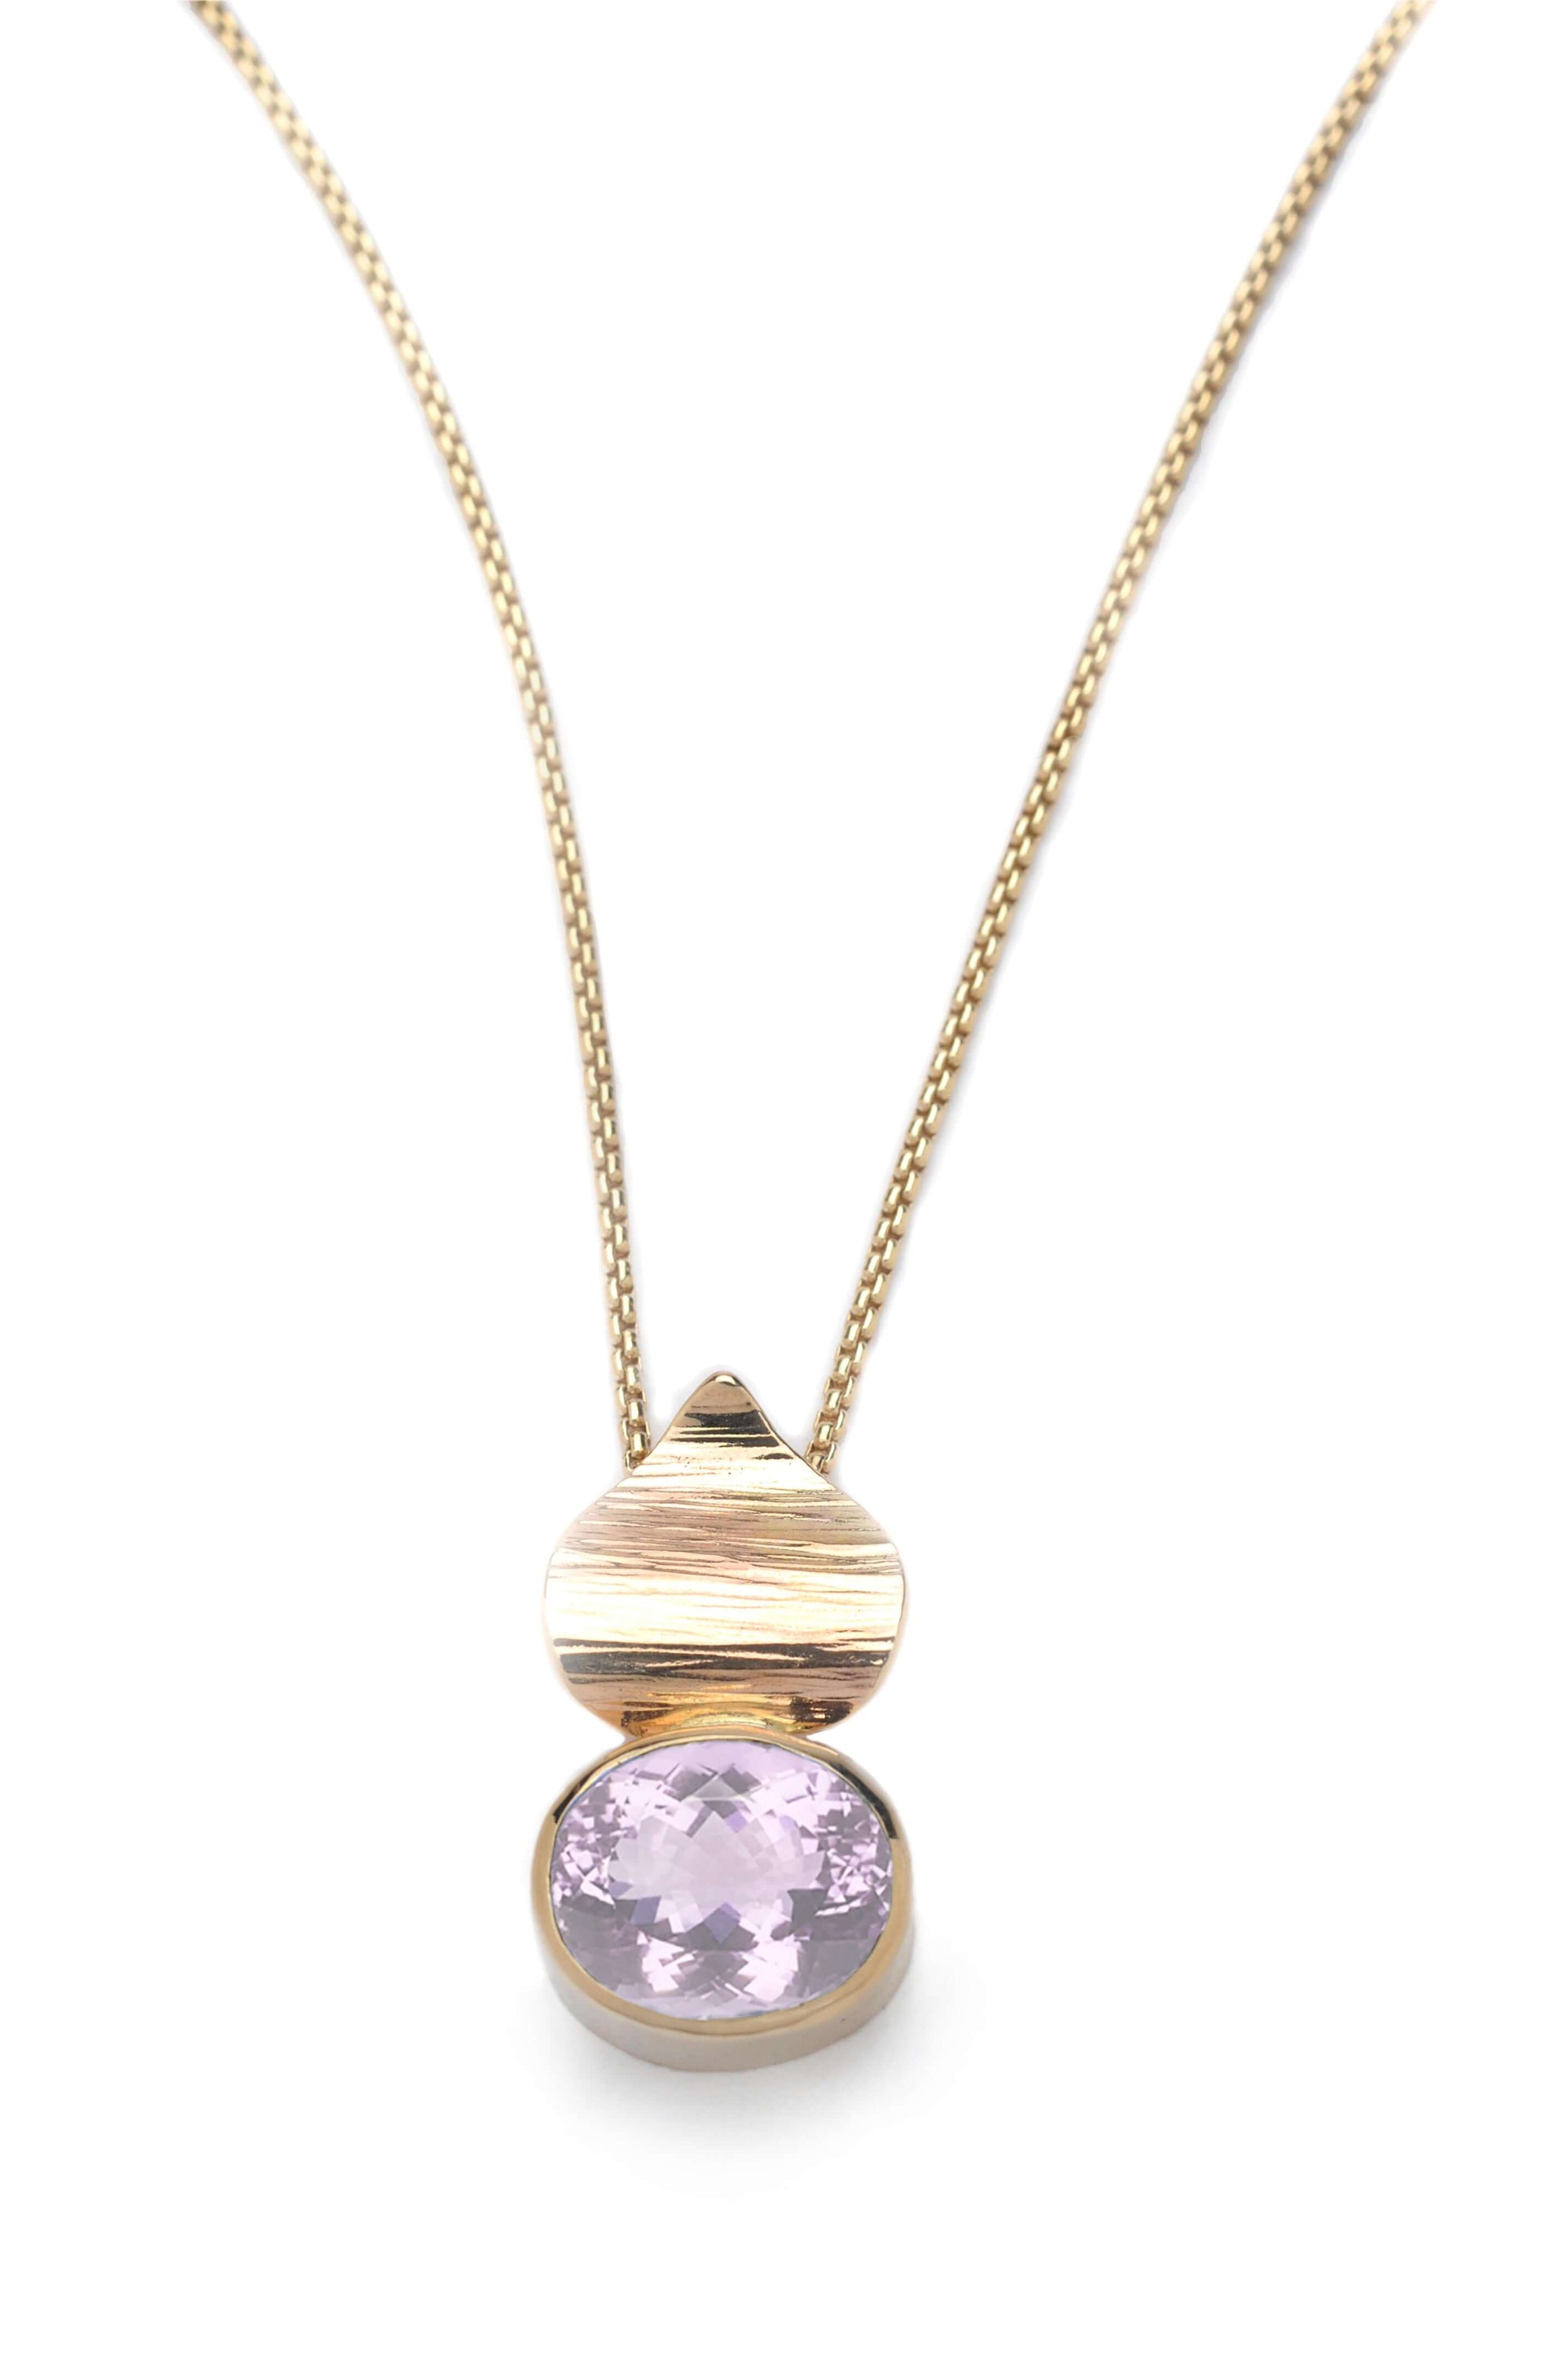 A 14k gold pink amethyst pendant is shown on a gold chain